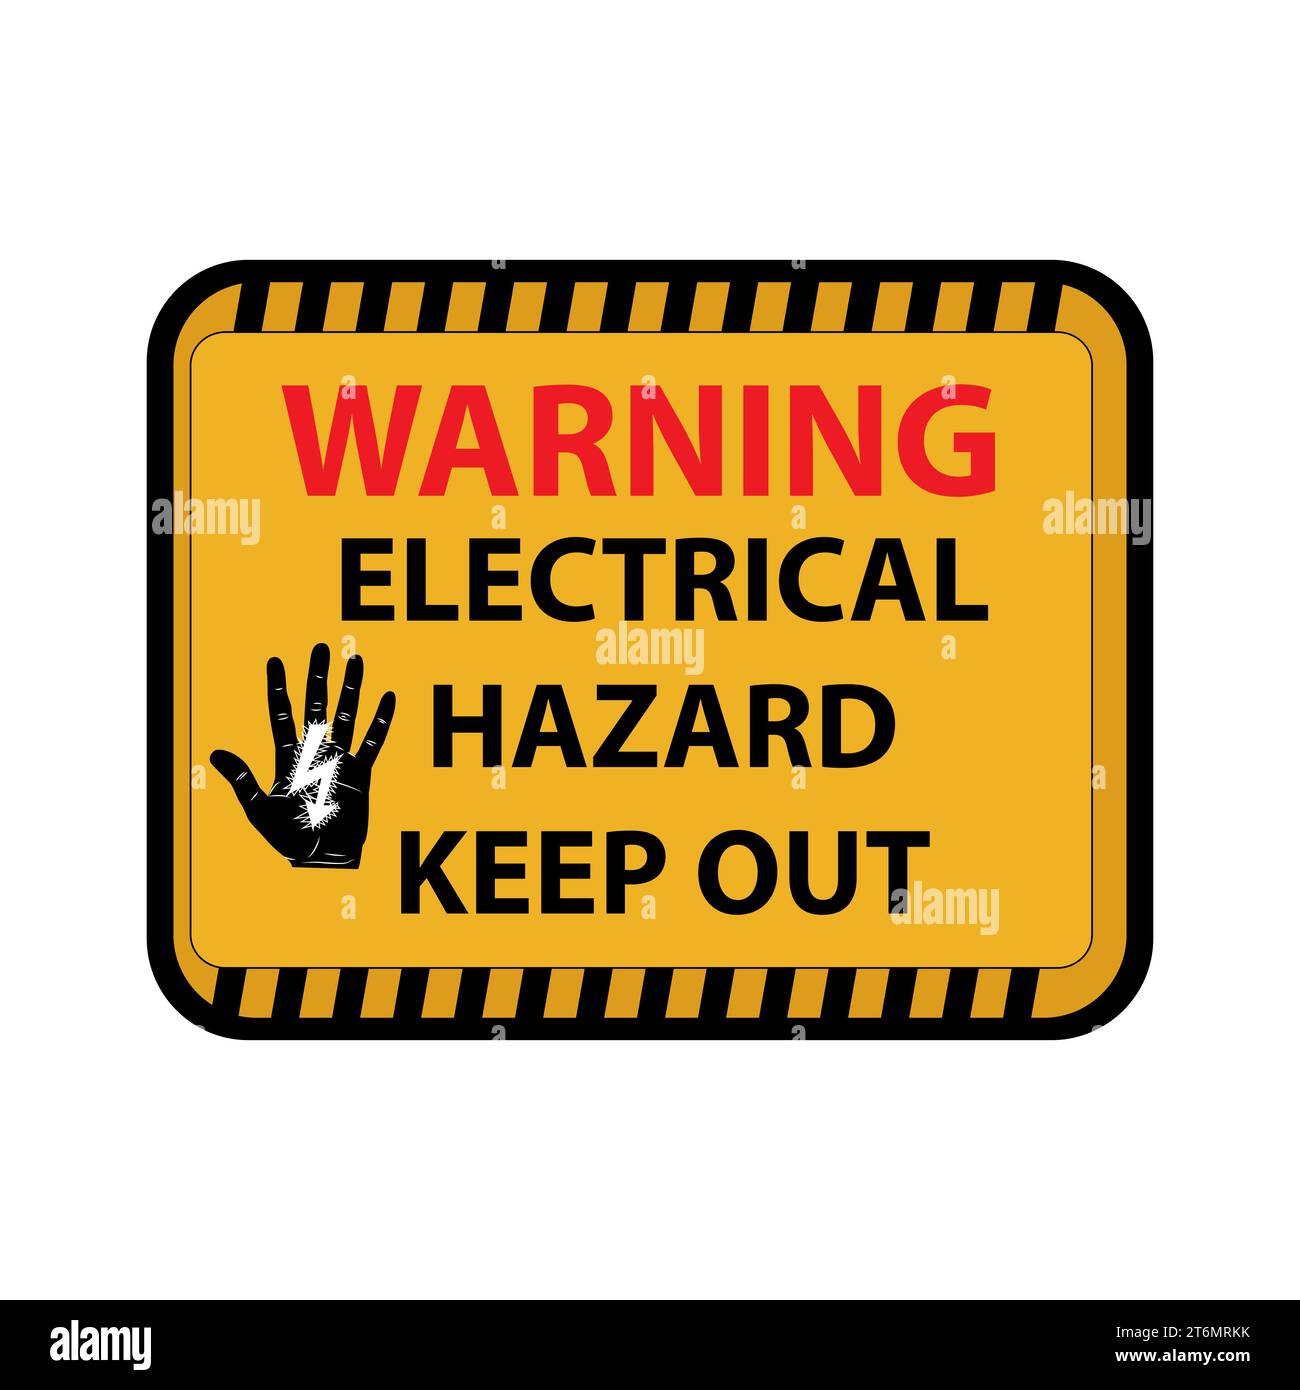 Warning Electrical hazard keep out signs. Symbols of danger and warning signs. warning attention. attention vector icon. Stock Vector